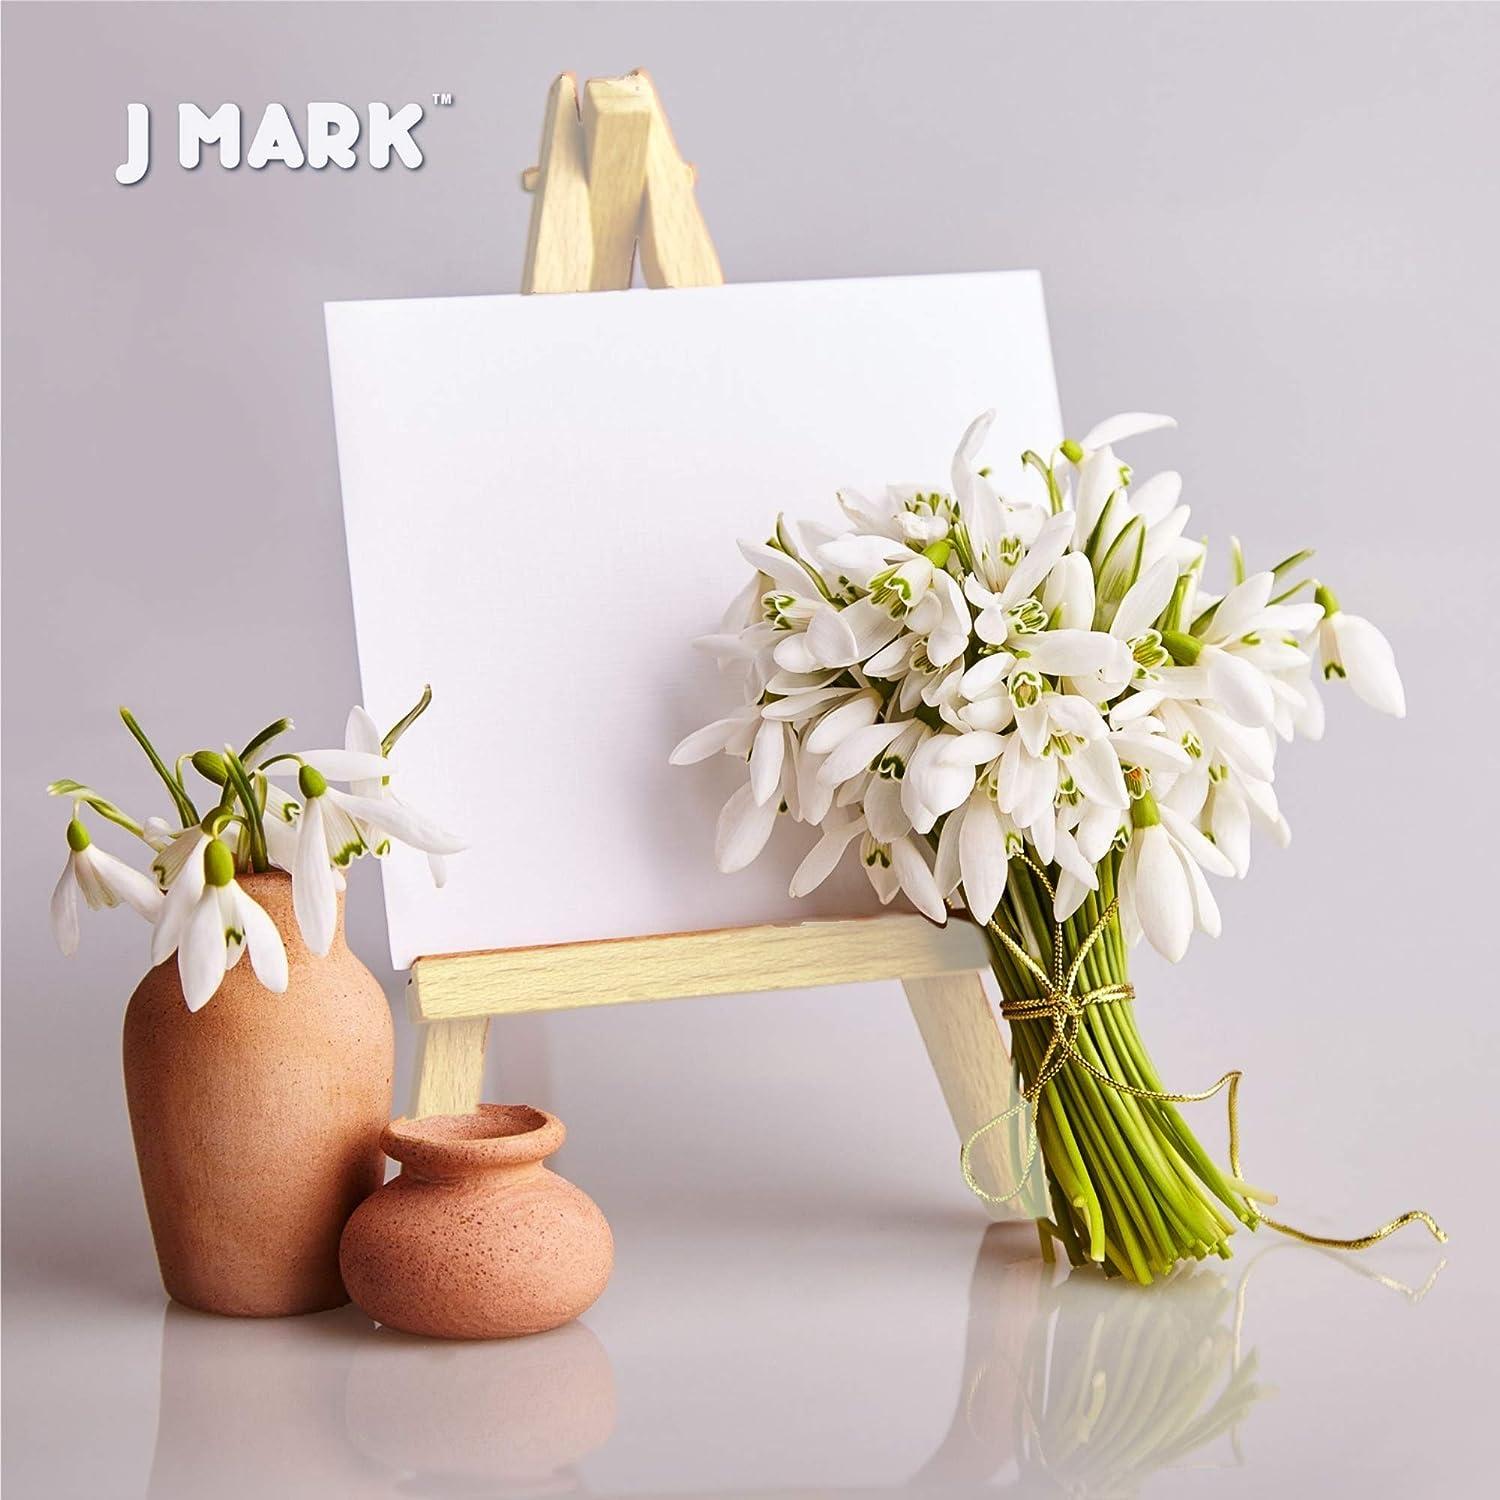  J MARK Painting Kit Includes Acrylic Paint Set, 8 x 10 in.  Canvases, Brushes, Palette and More